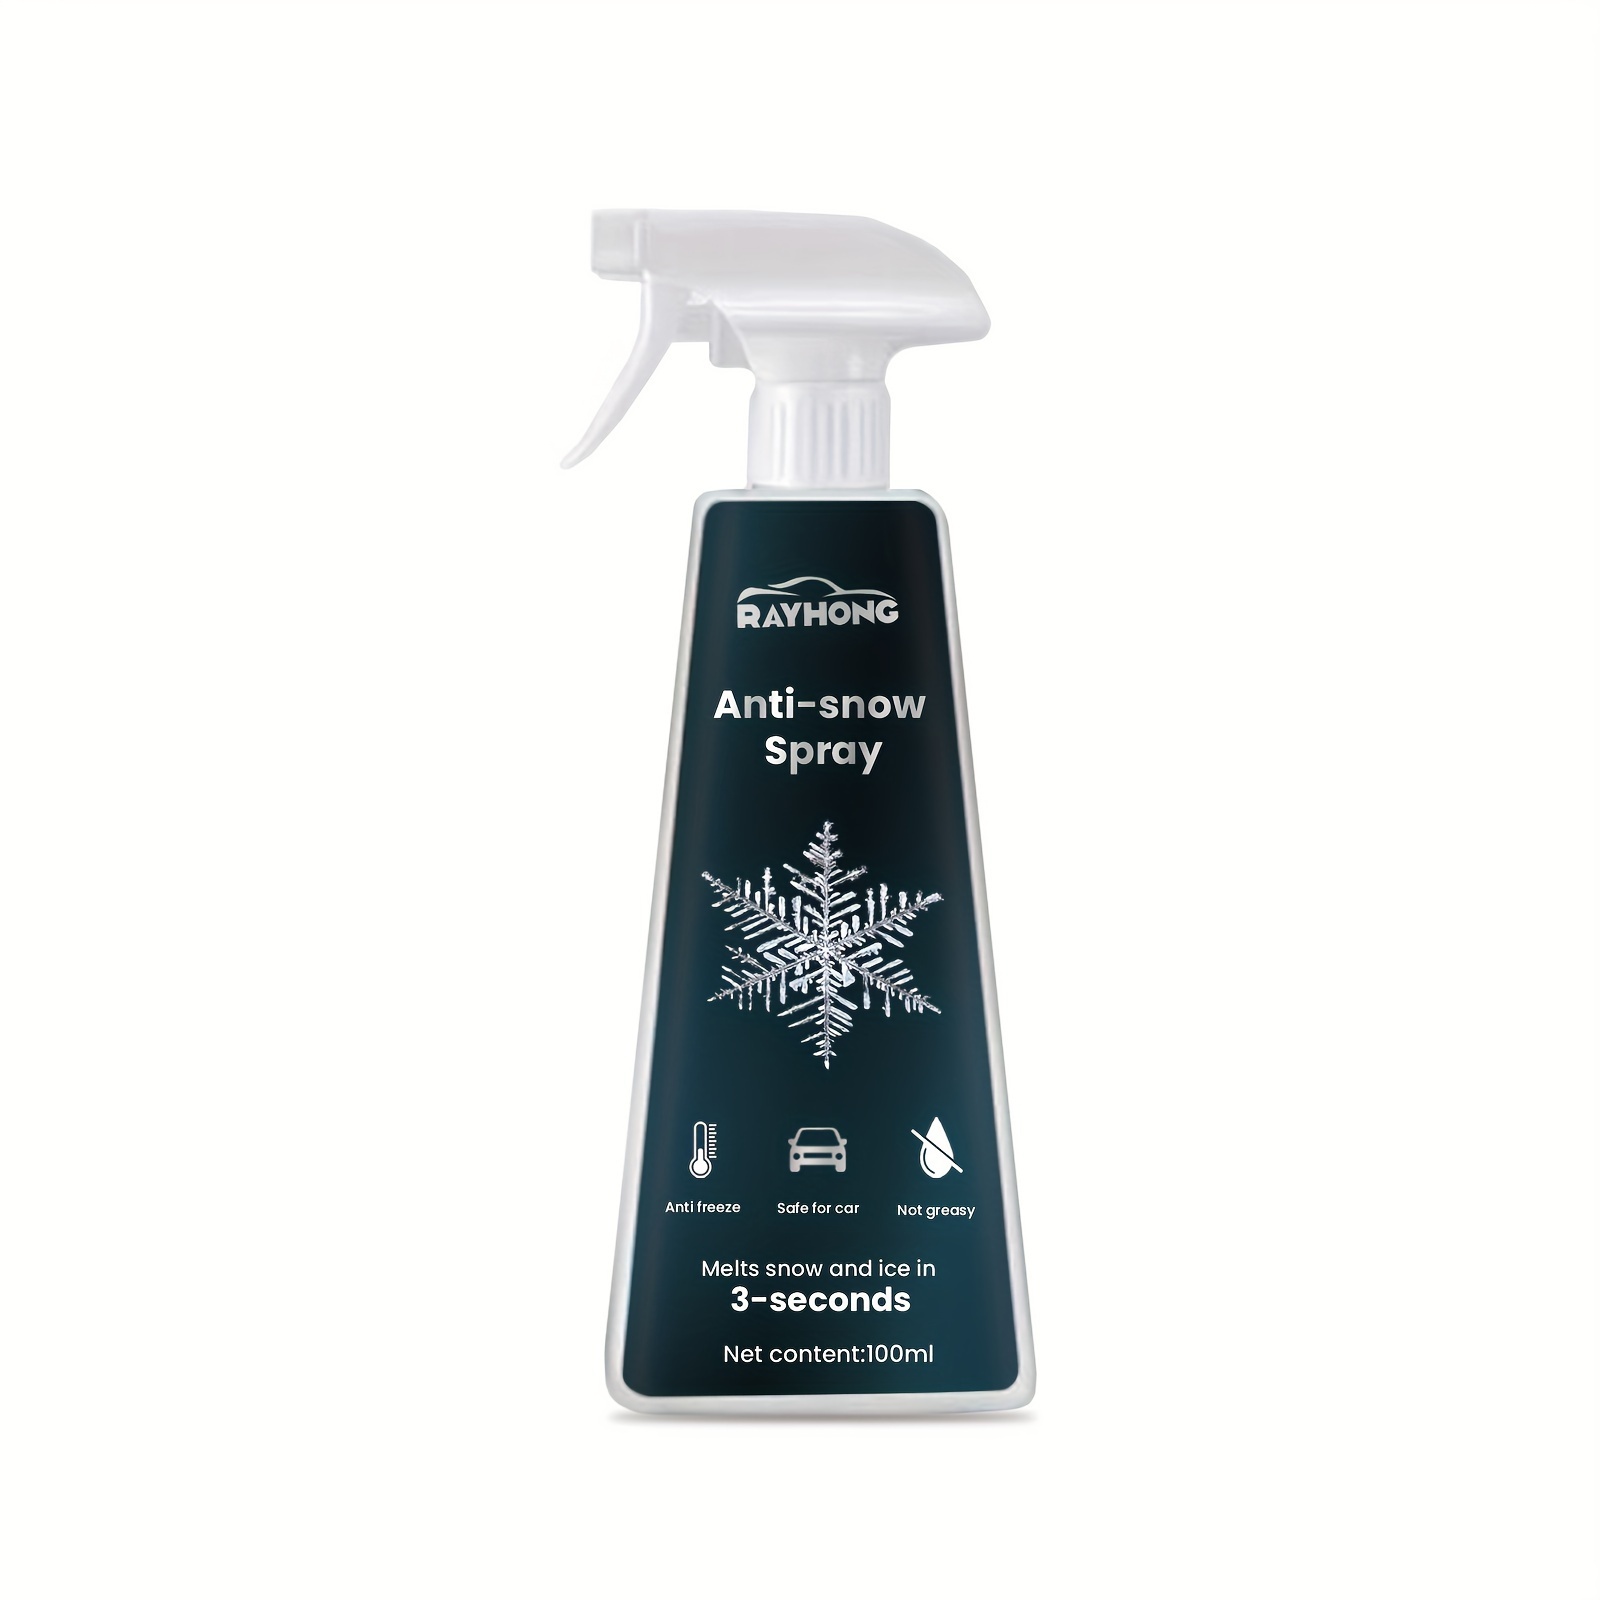 Deicer Spray For Car Windshield, Snow Melting Spray Car Windshield Deicing  Spray, Instantly Melts Ice & Winter Frost For Mirrors Windows